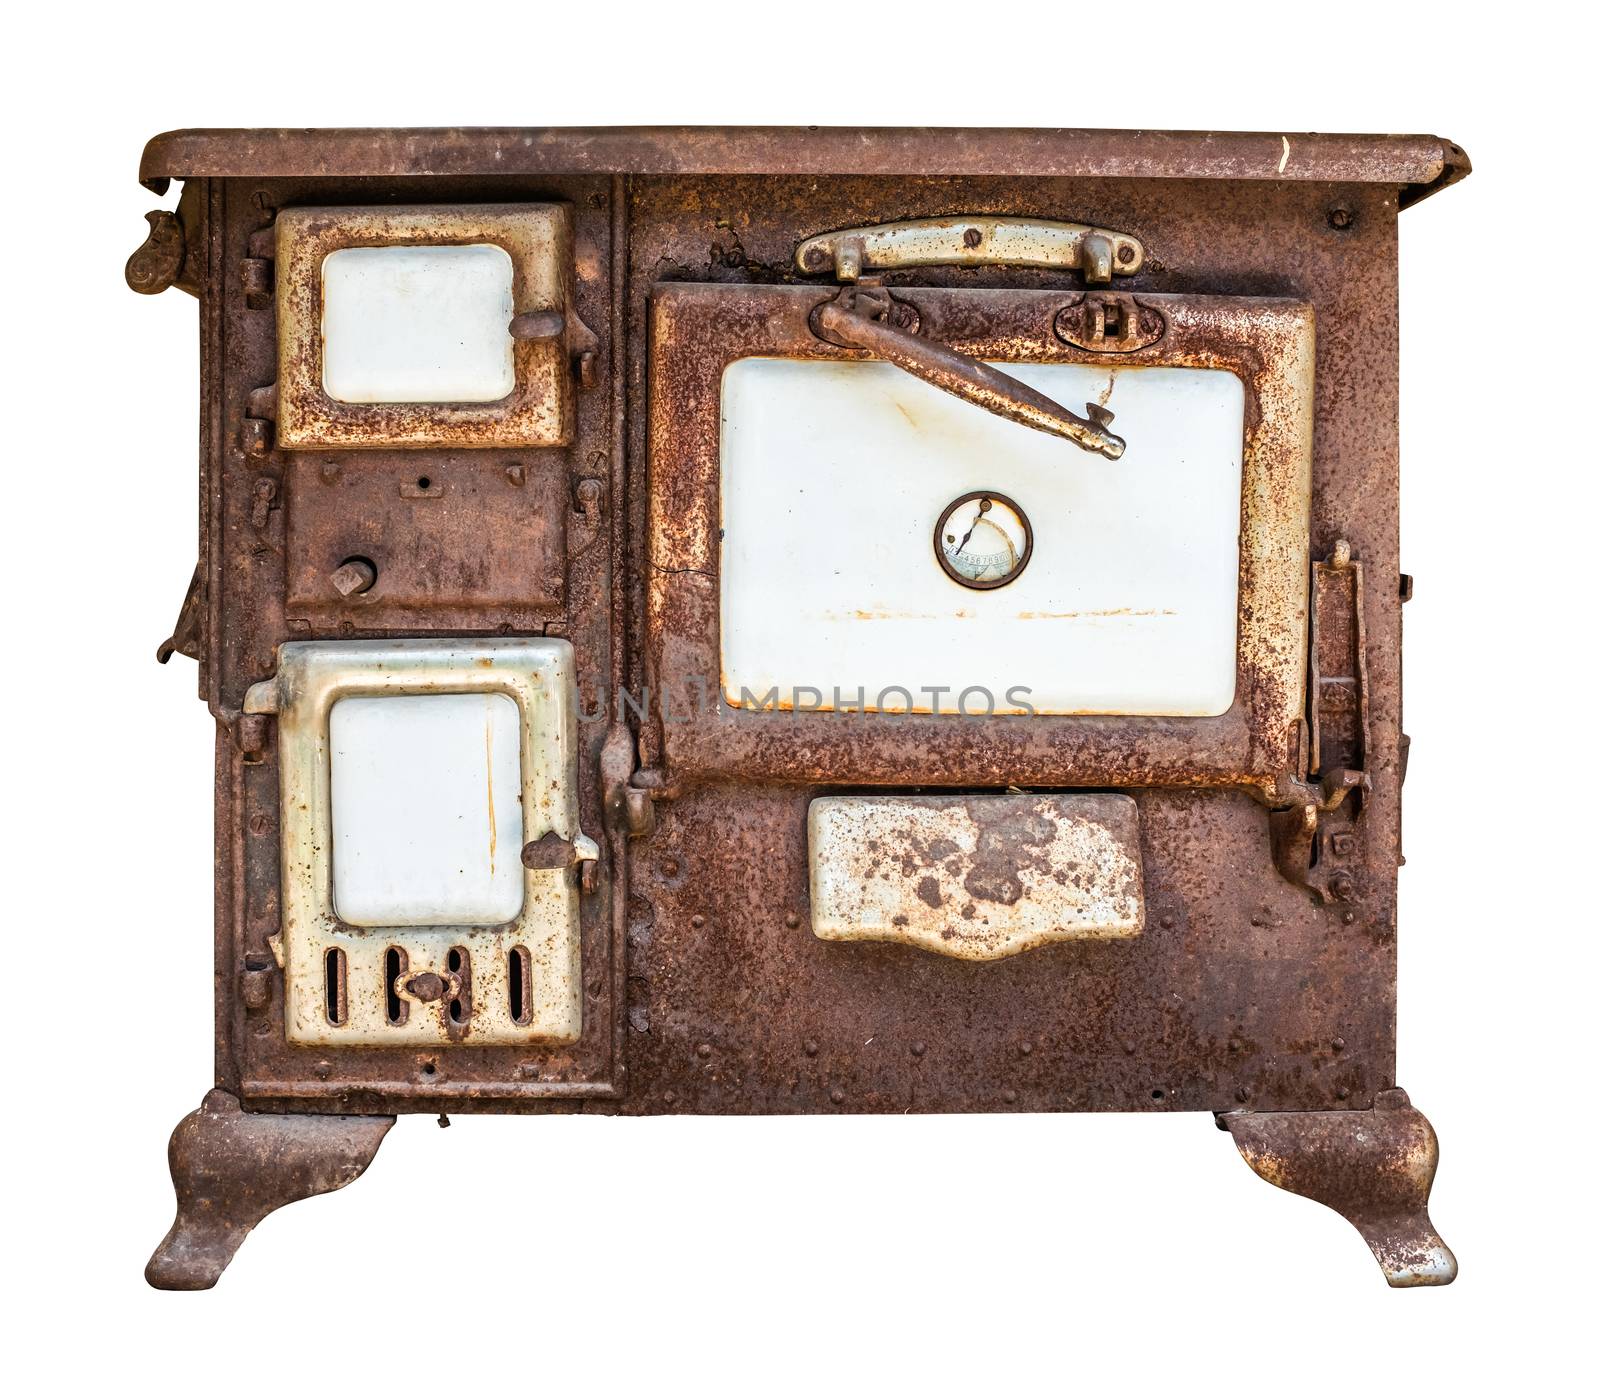 Isolated Rusty Old Farmhouse Stove, Oven Or Range On A White Background